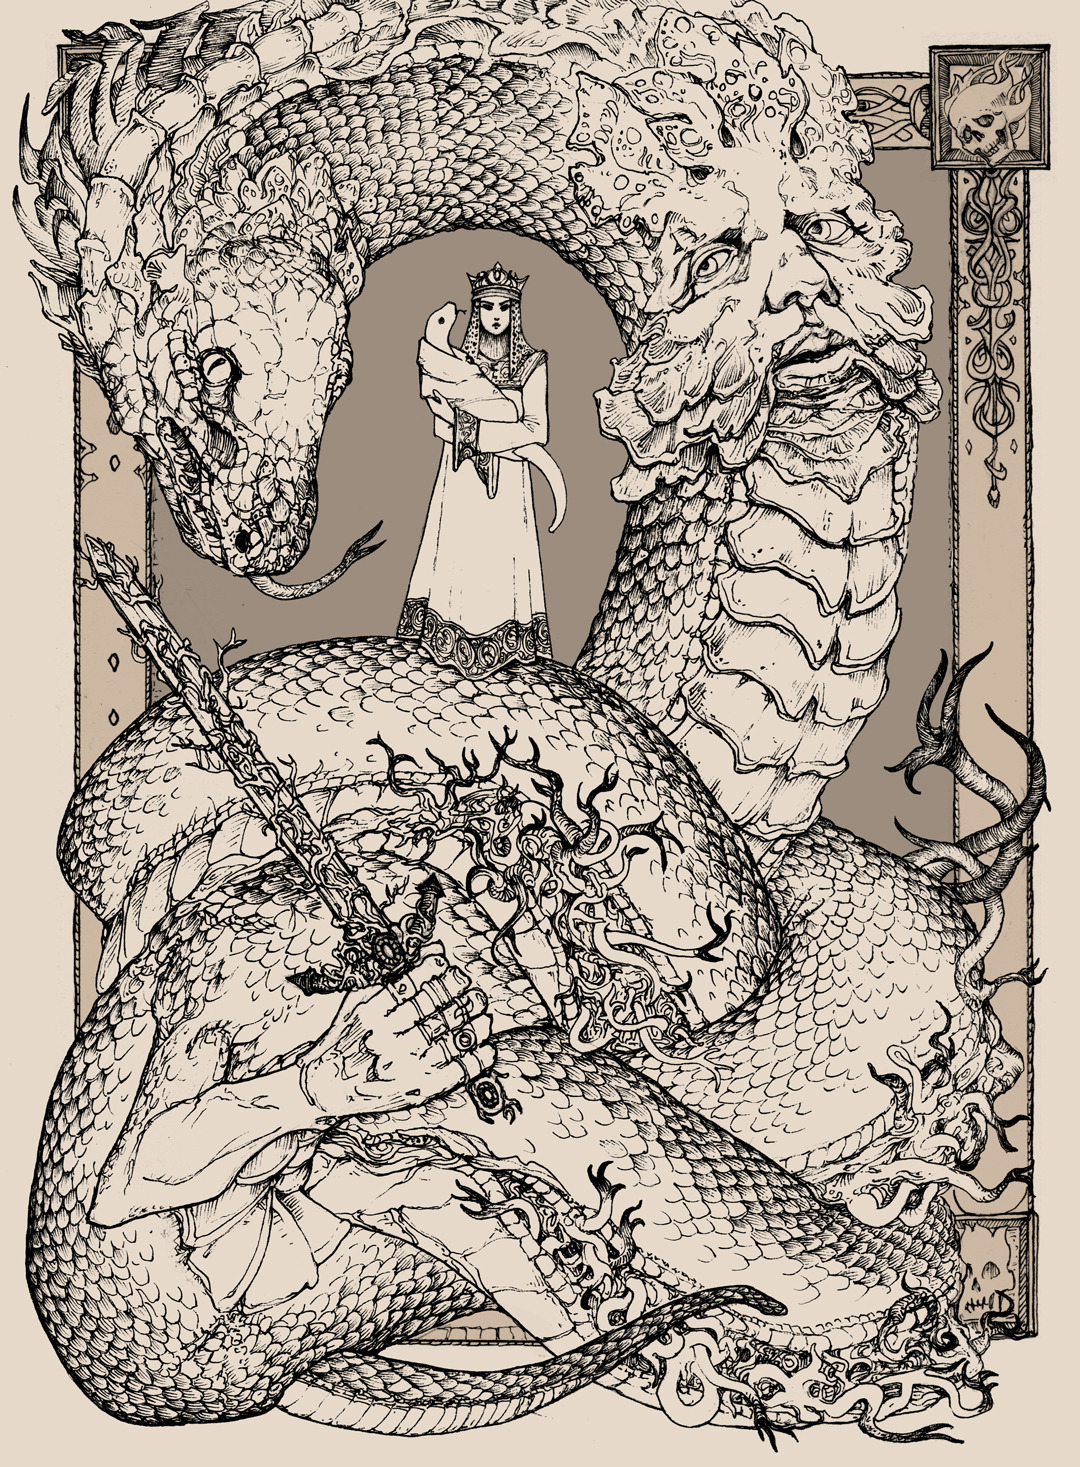 Fanart featuring an intricately drawn dragon curling around the frame with a human figure standing in the middle.